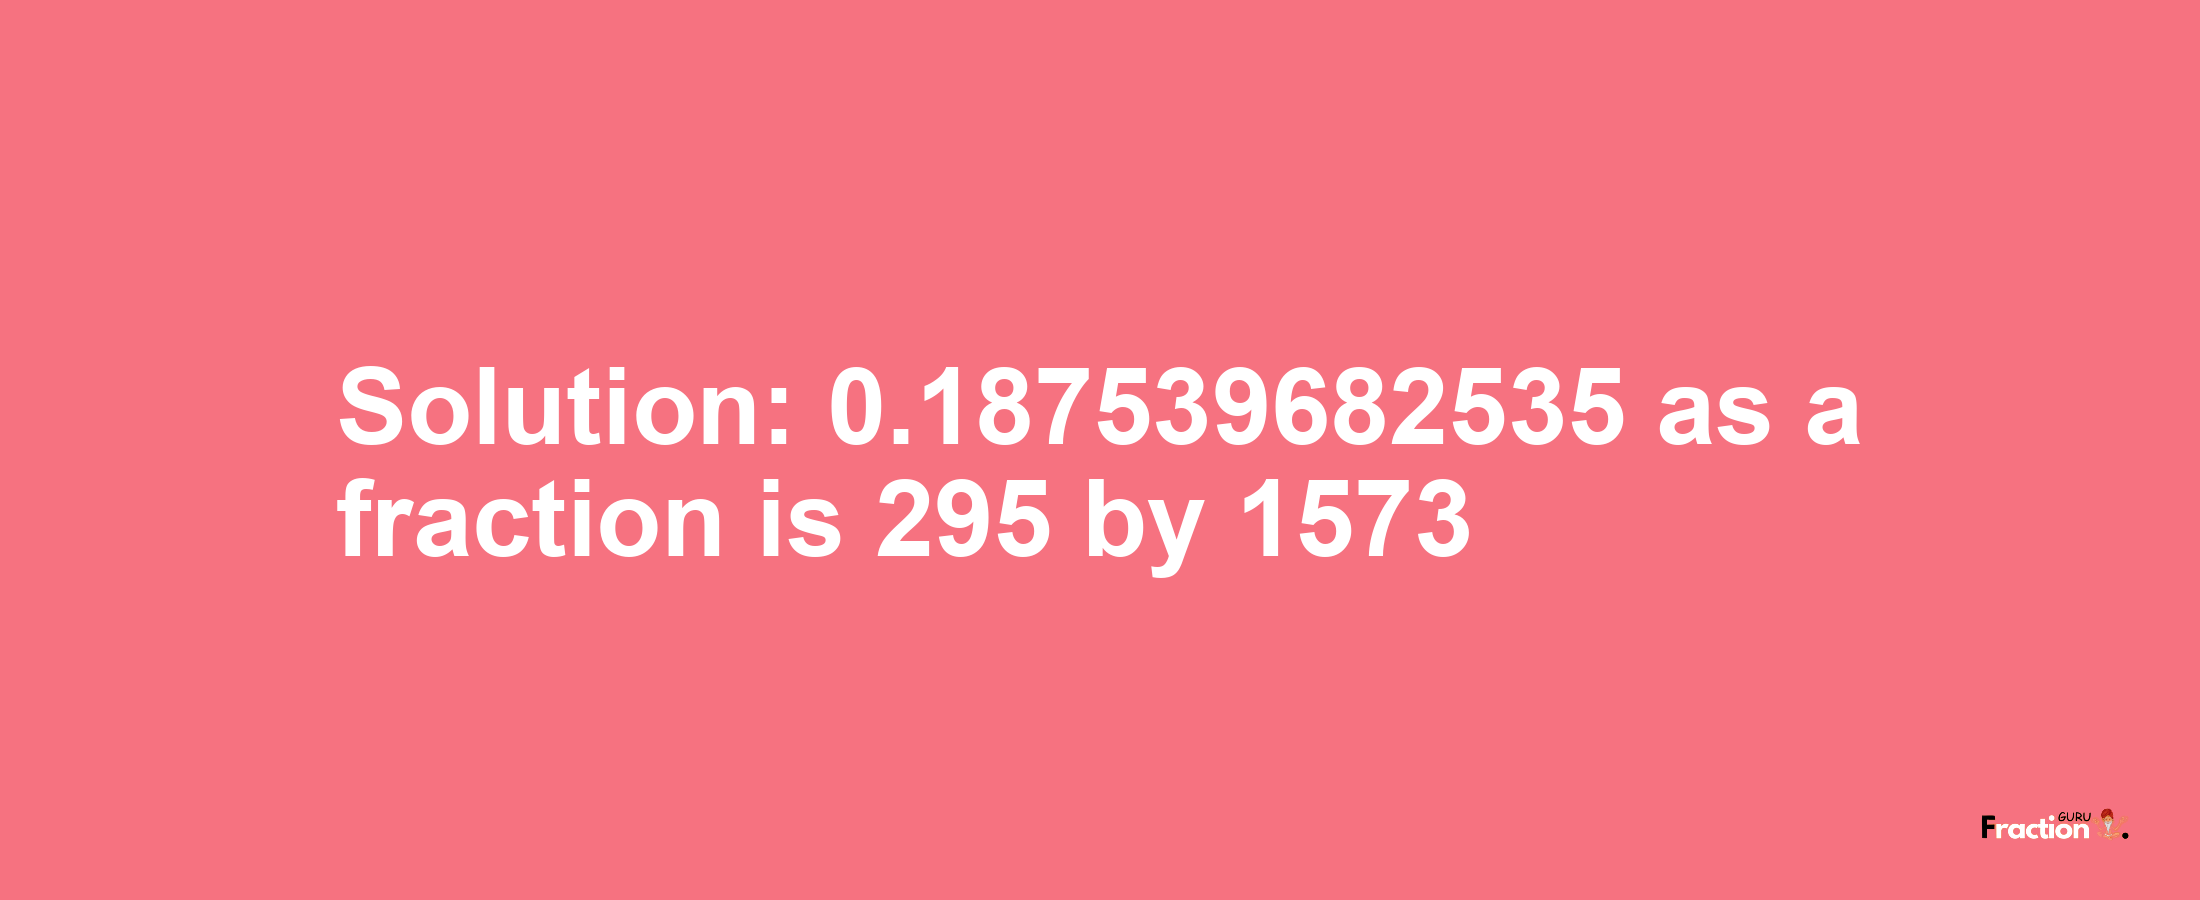 Solution:0.187539682535 as a fraction is 295/1573